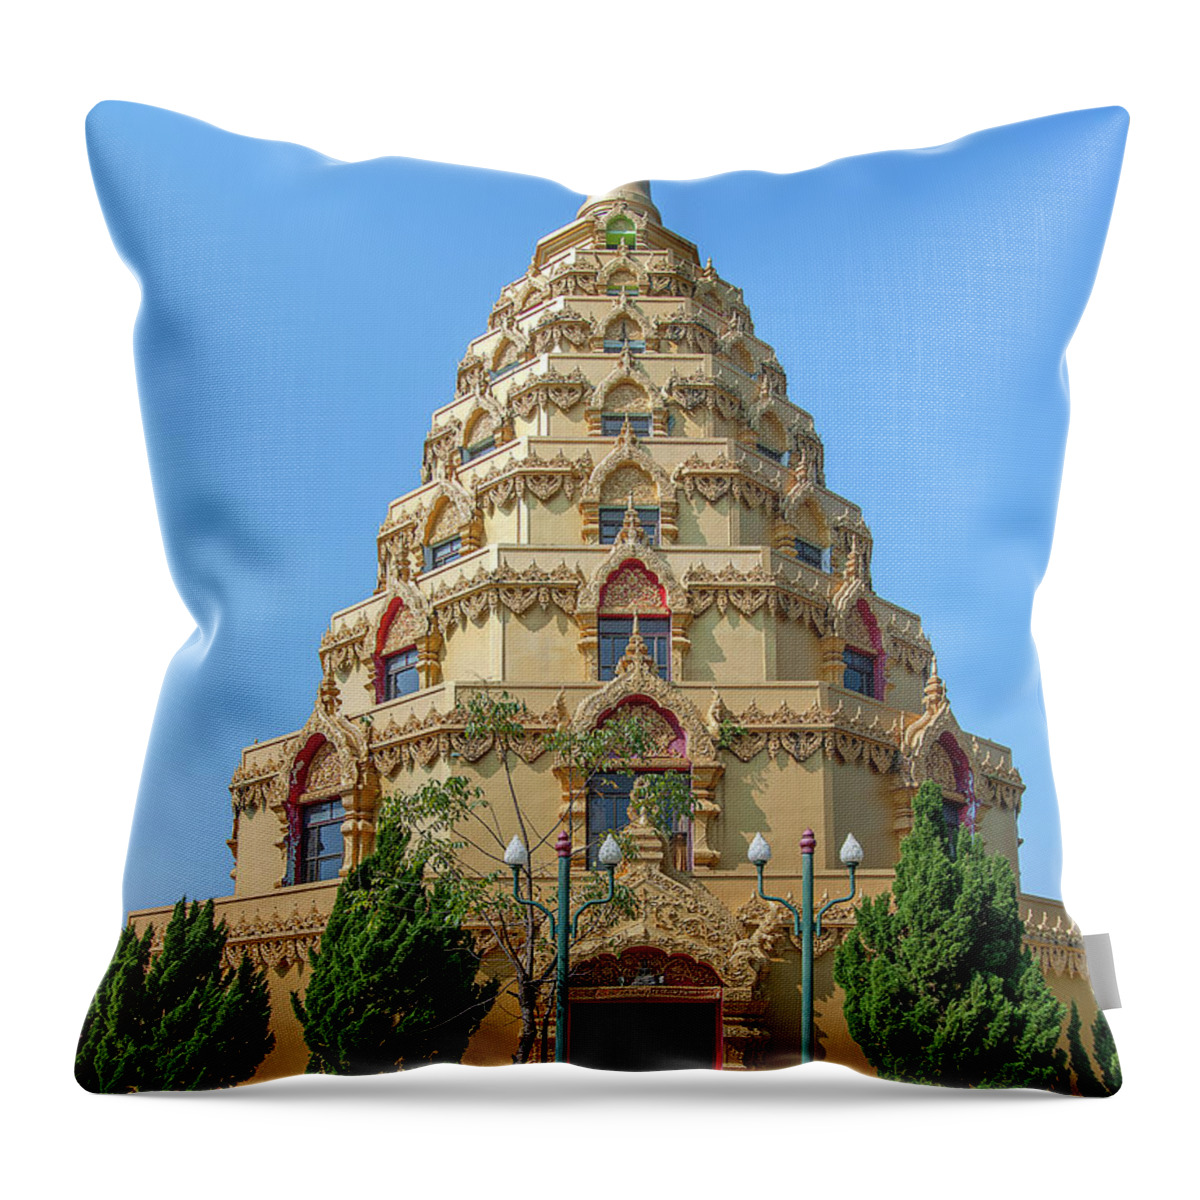 Scenic Throw Pillow featuring the photograph Wat Nong Bua Worawet Wisit Phra Chedi City of Nirvana DTHCM2088 by Gerry Gantt